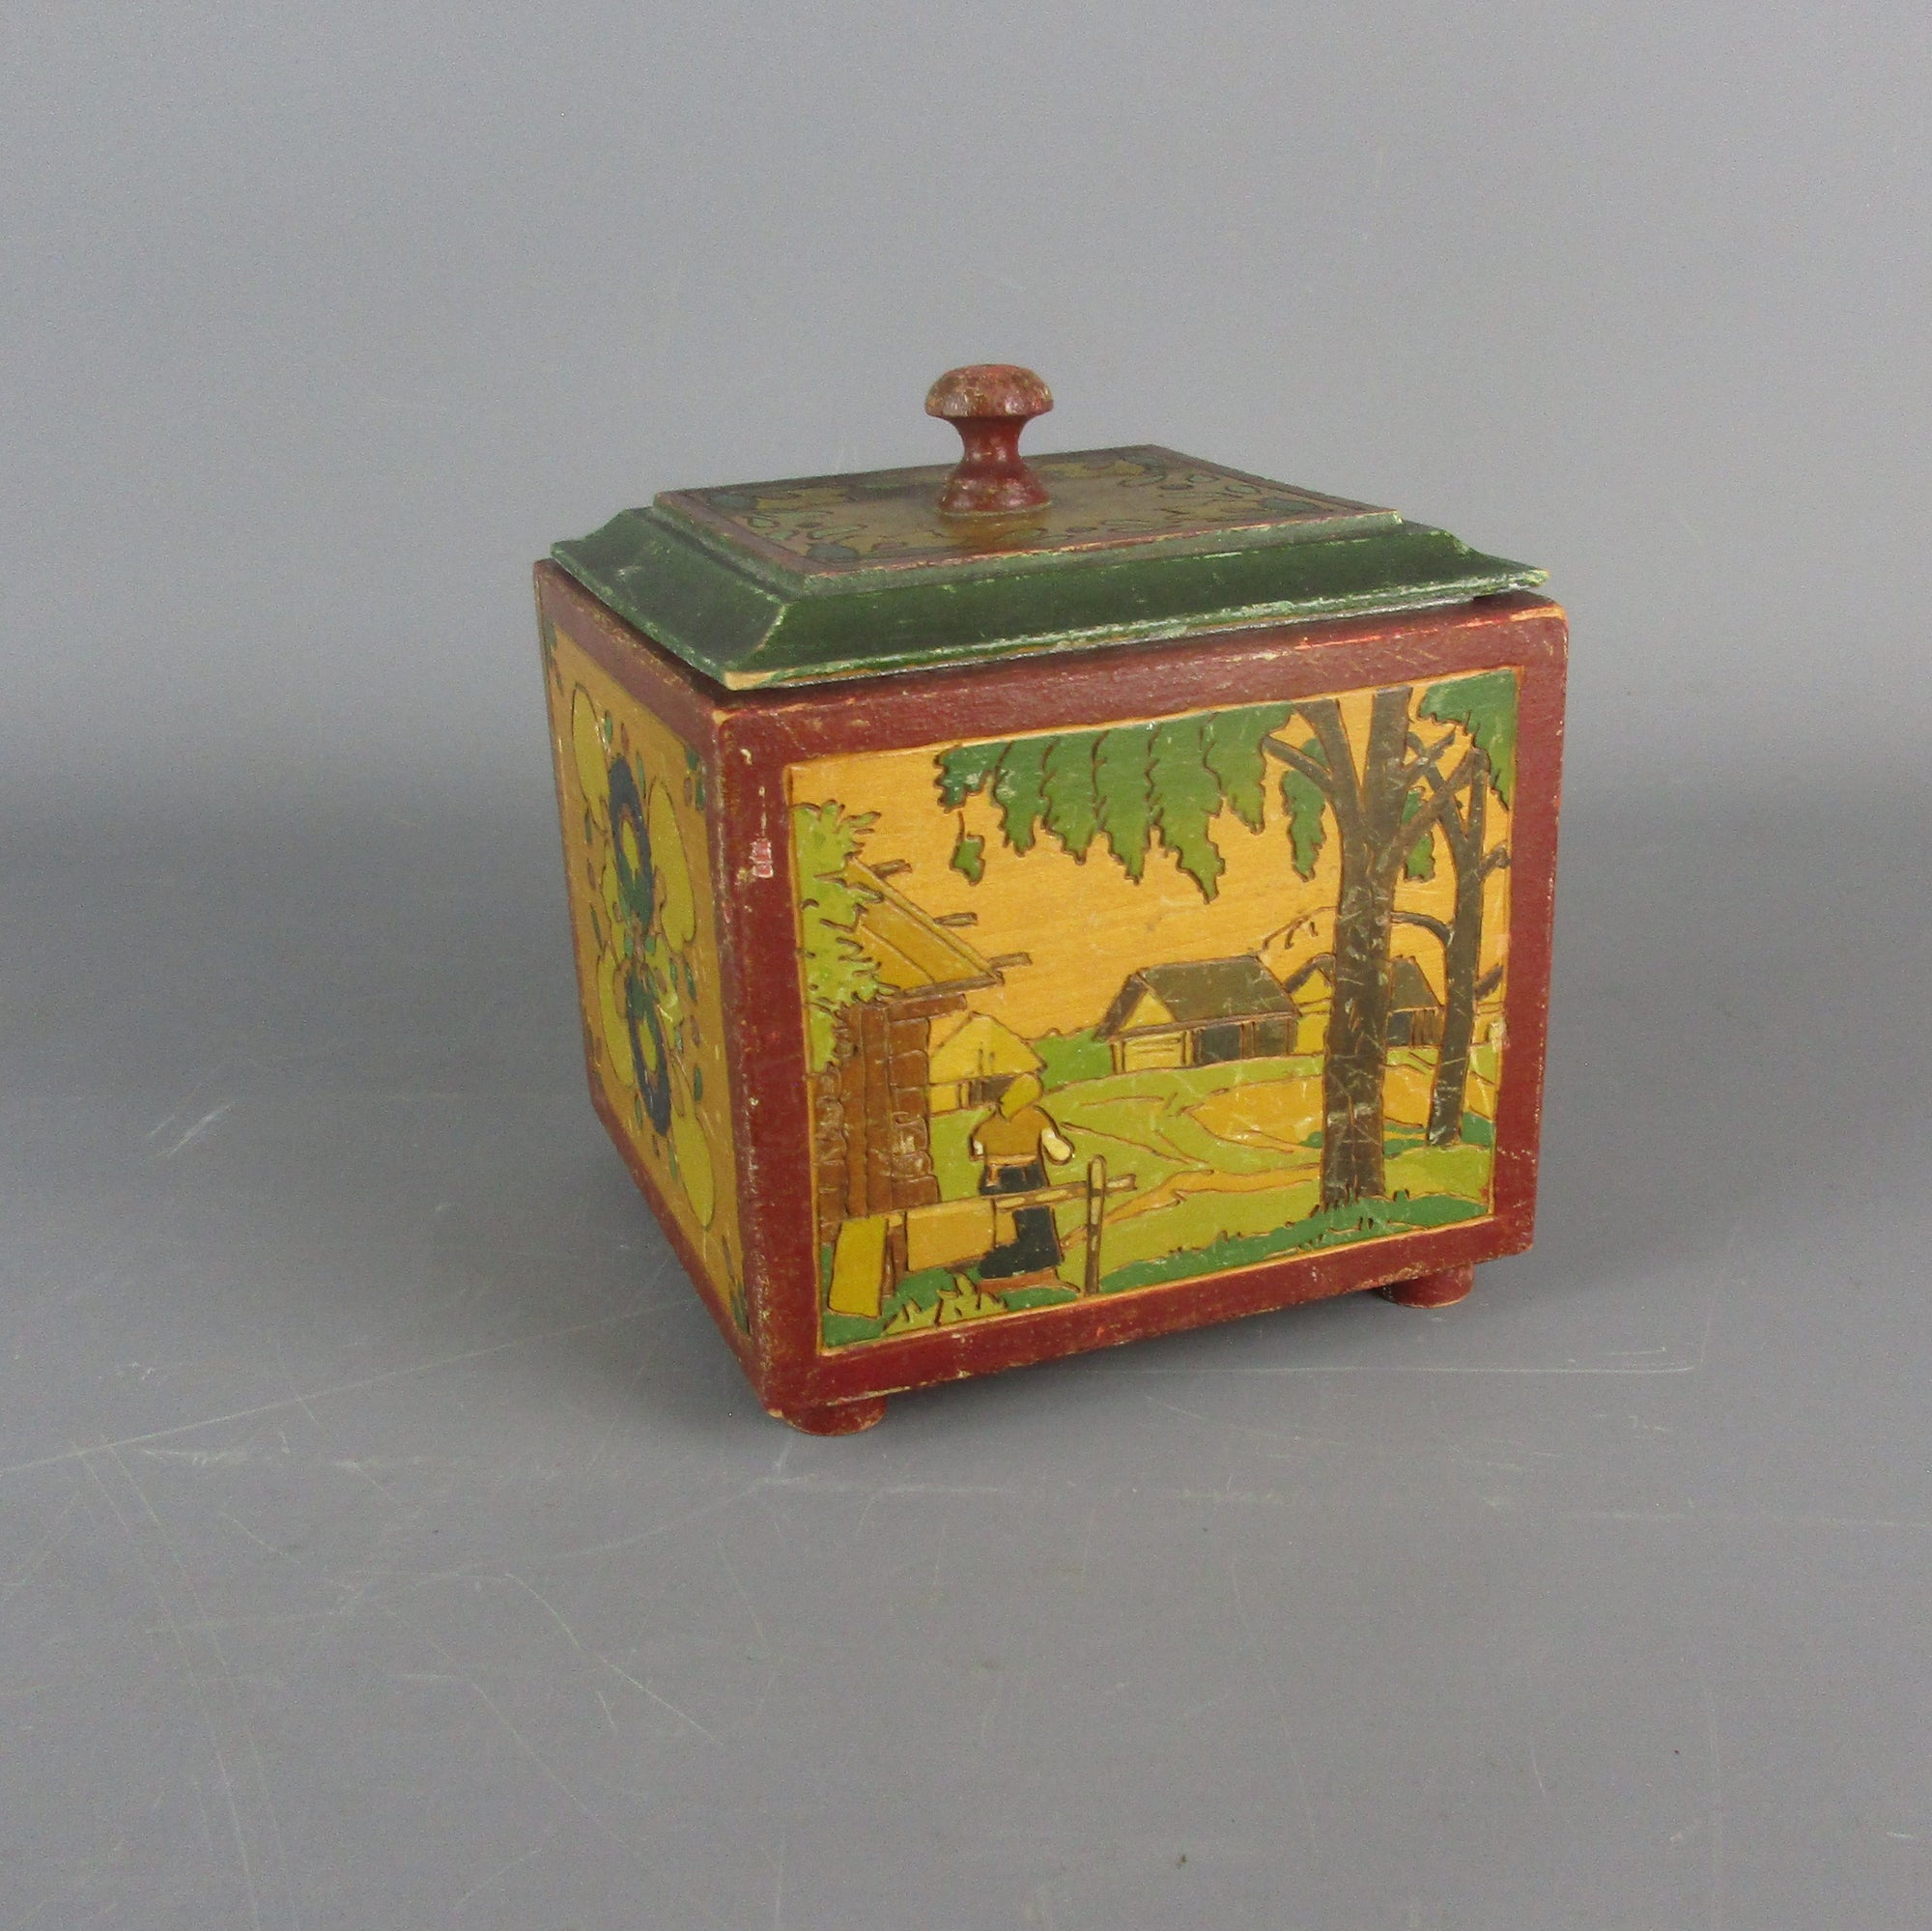 Eastern European Painted Wooden Lidded Box Vintage Early 20th Century